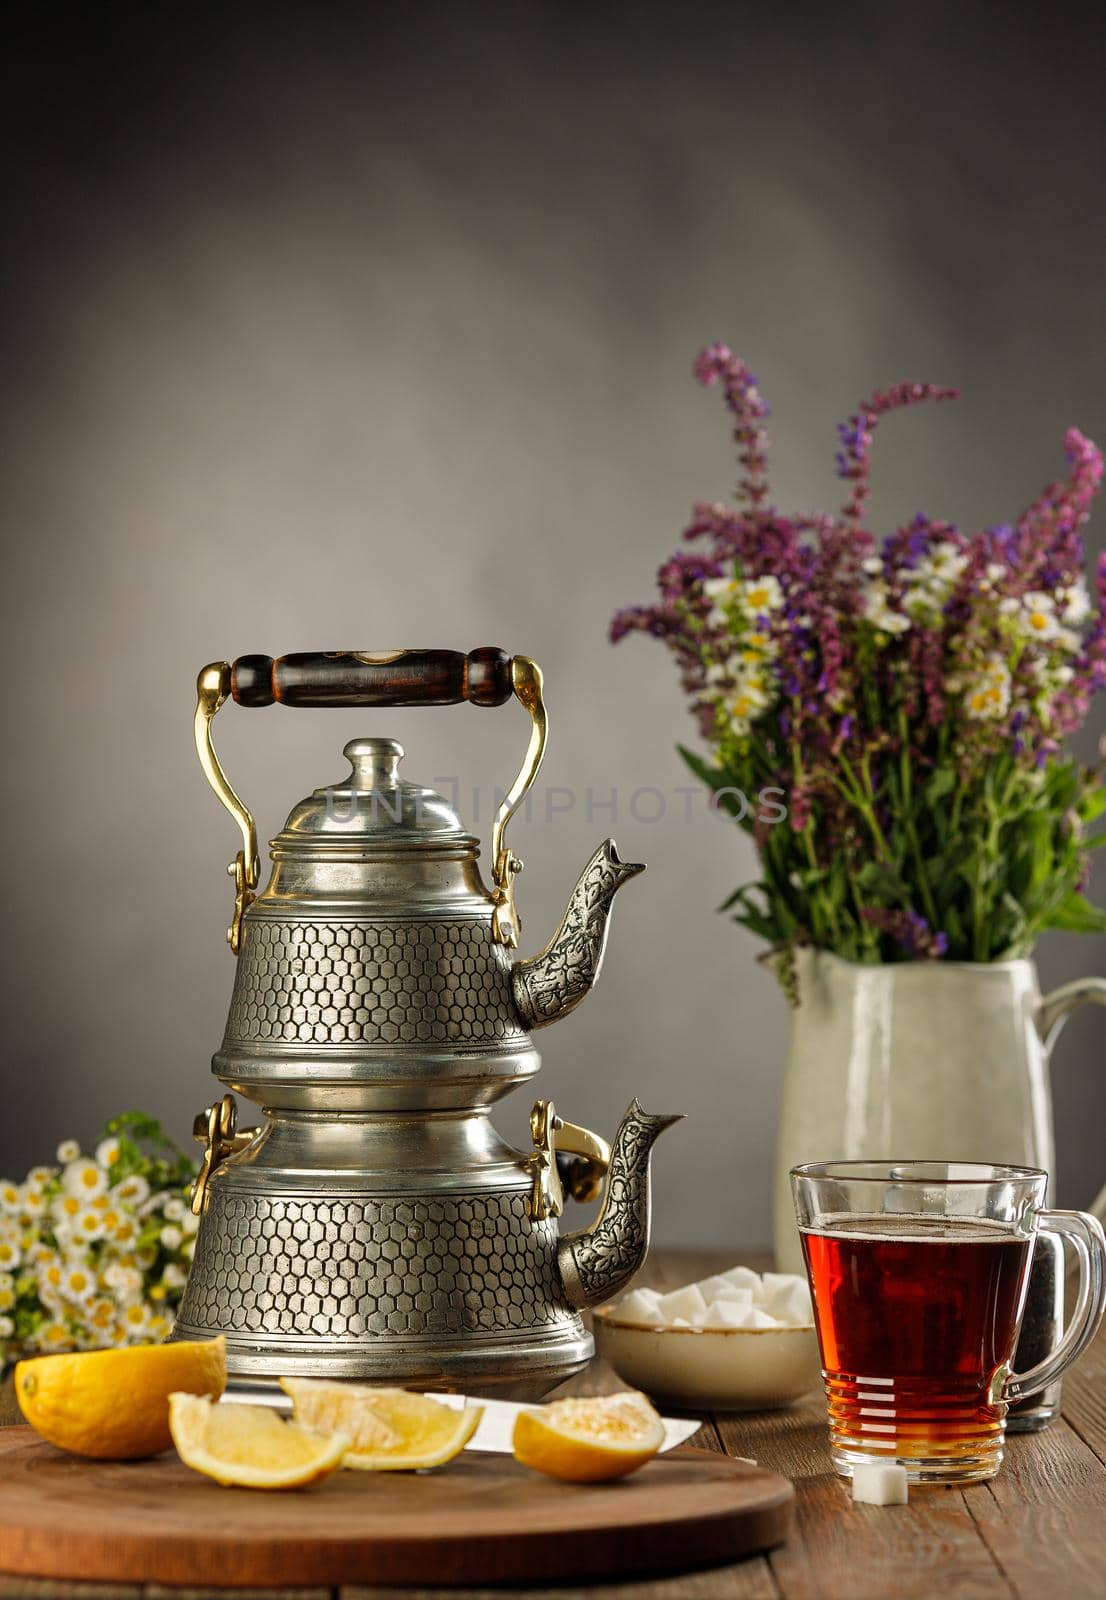 Still life tea drinking a cup of tea with a double turkish kettle and a lemon on a wooden board, flowers in the jug by Gravika